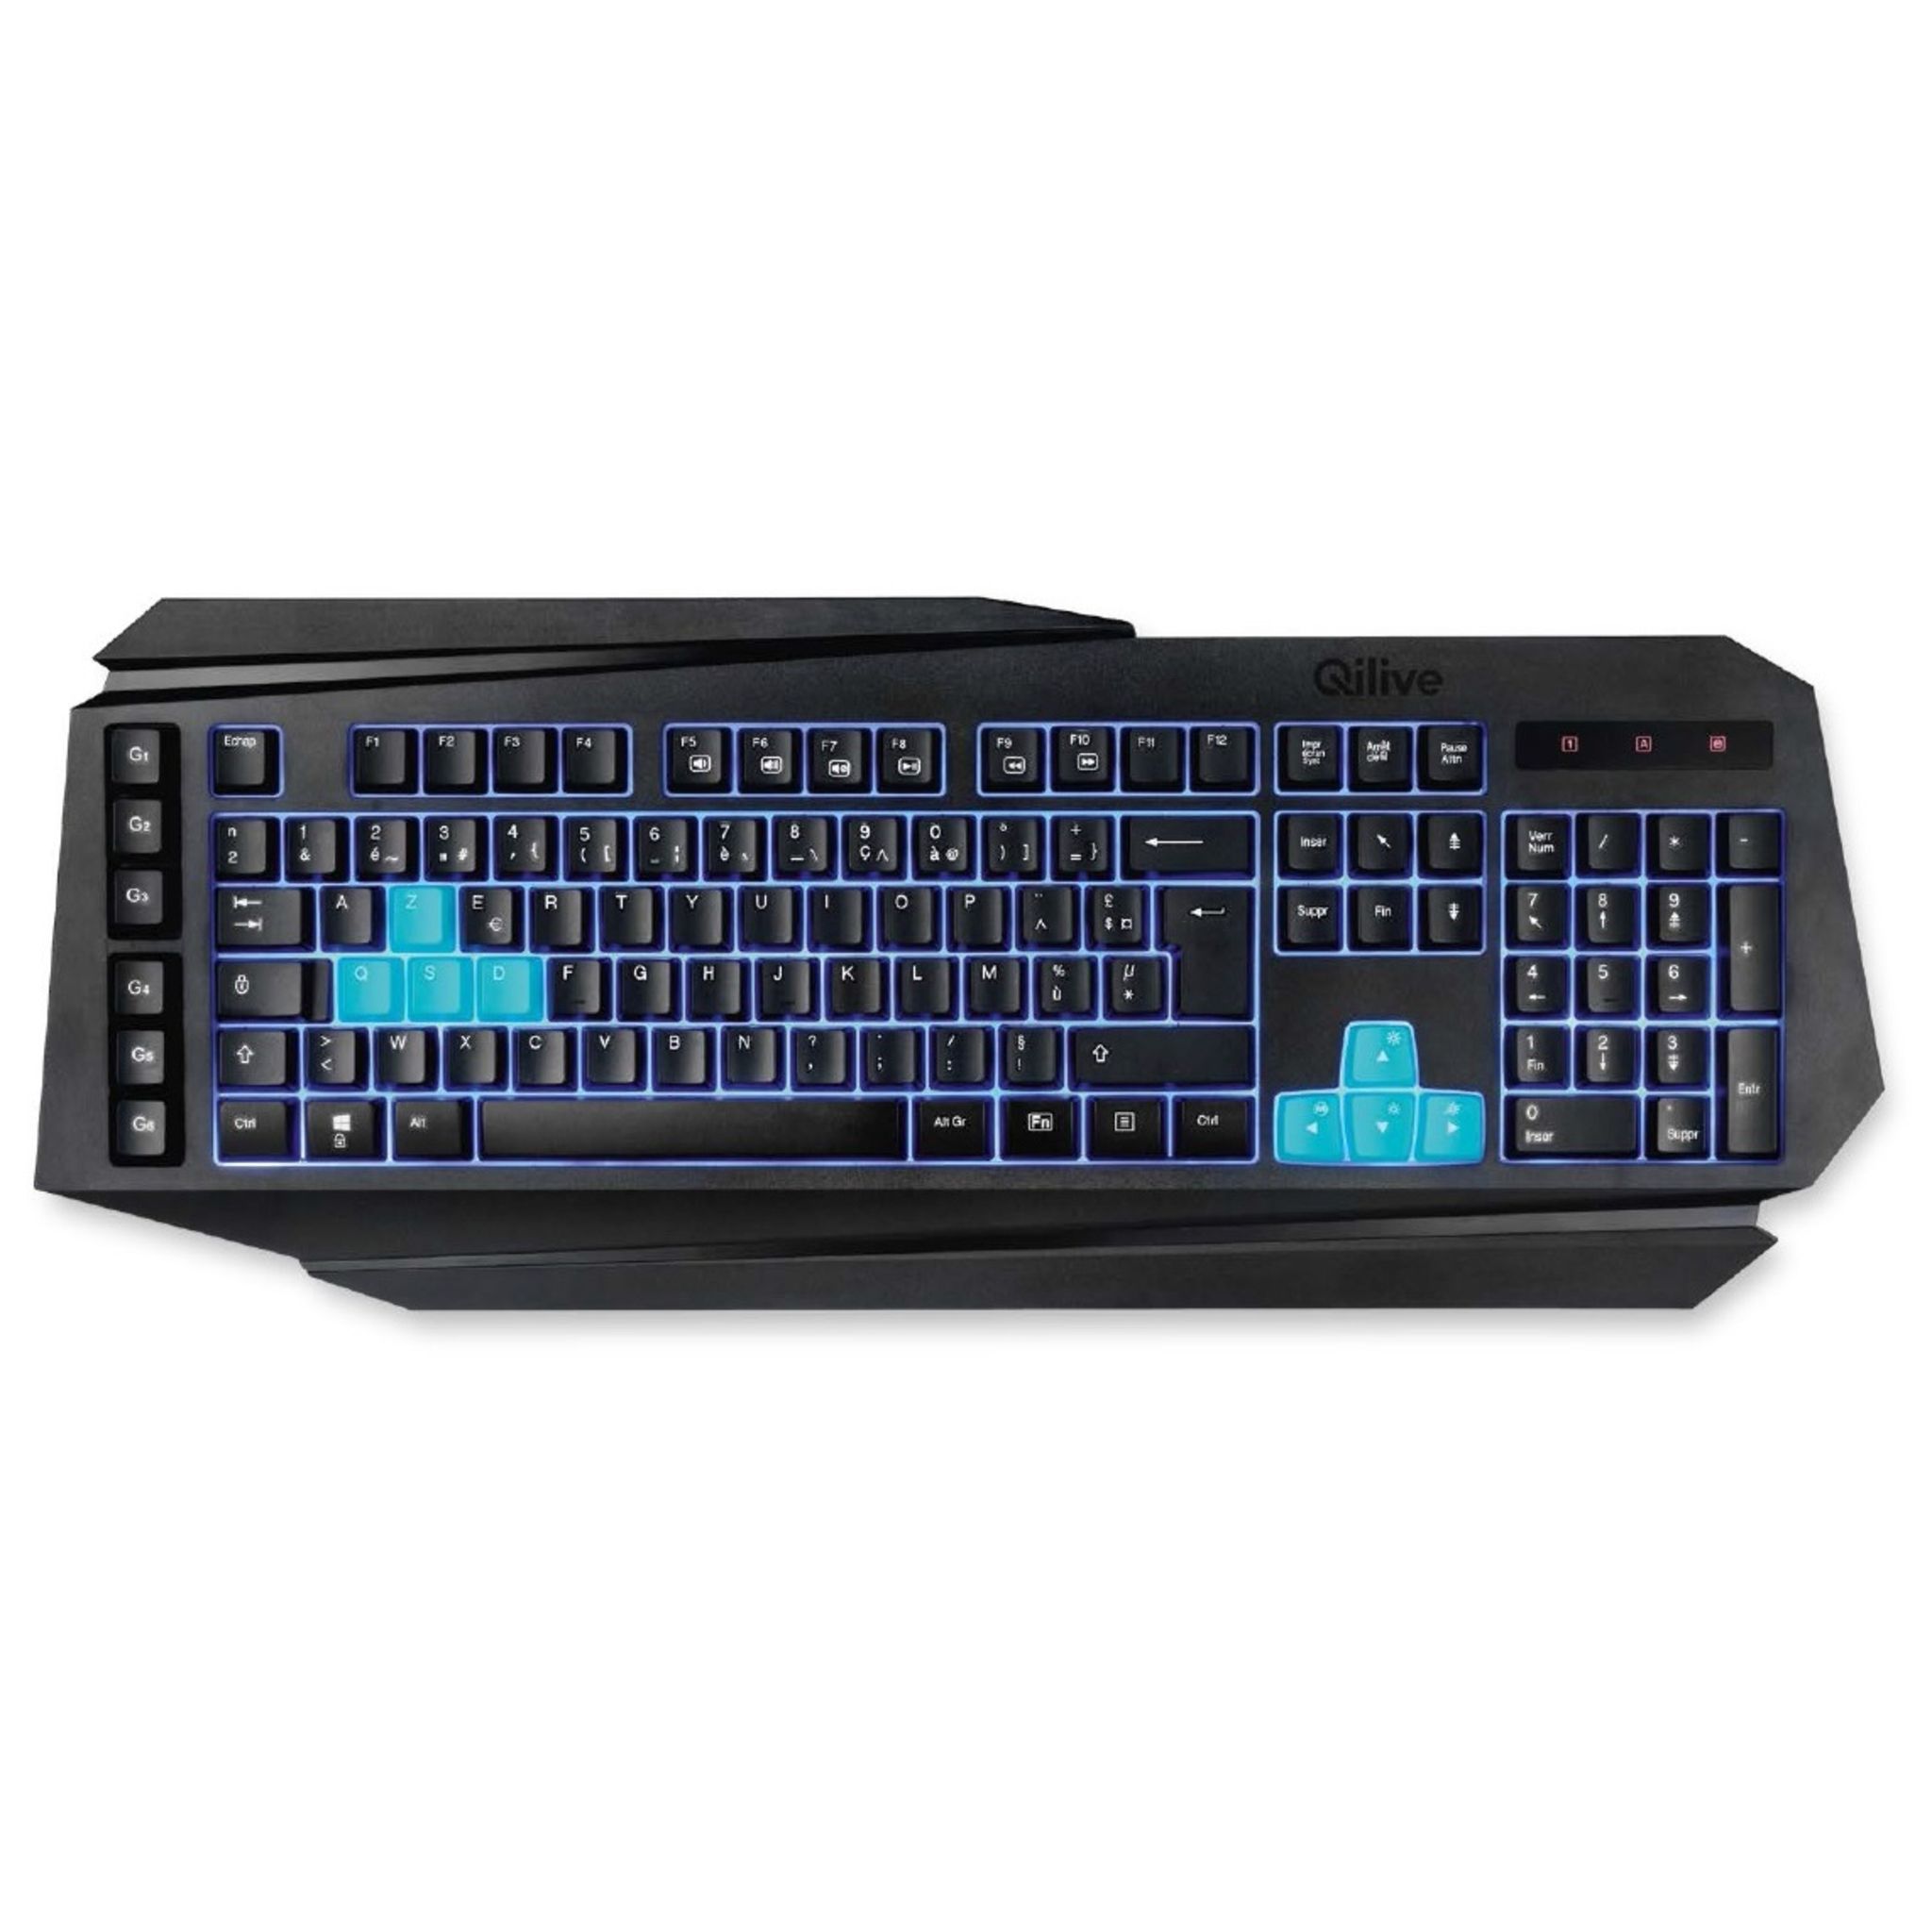 QILIVE Clavier filaire Gaming Qilive pas cher 